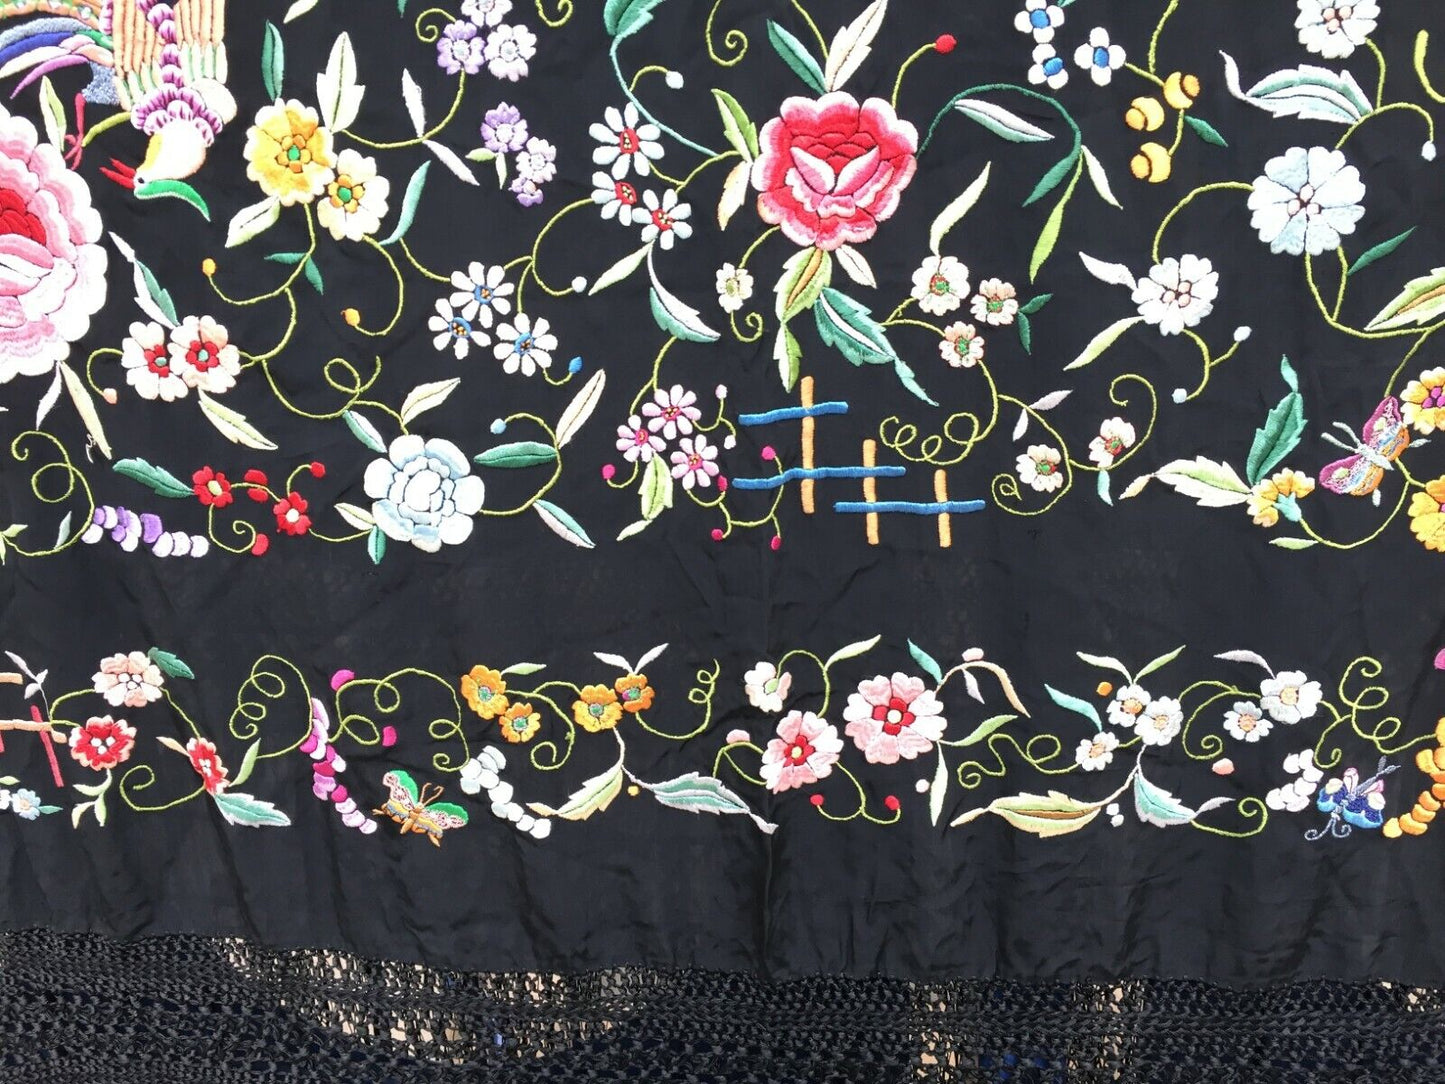 Close-up of the floral motifs woven onto the cotton base, highlighting their intricate details